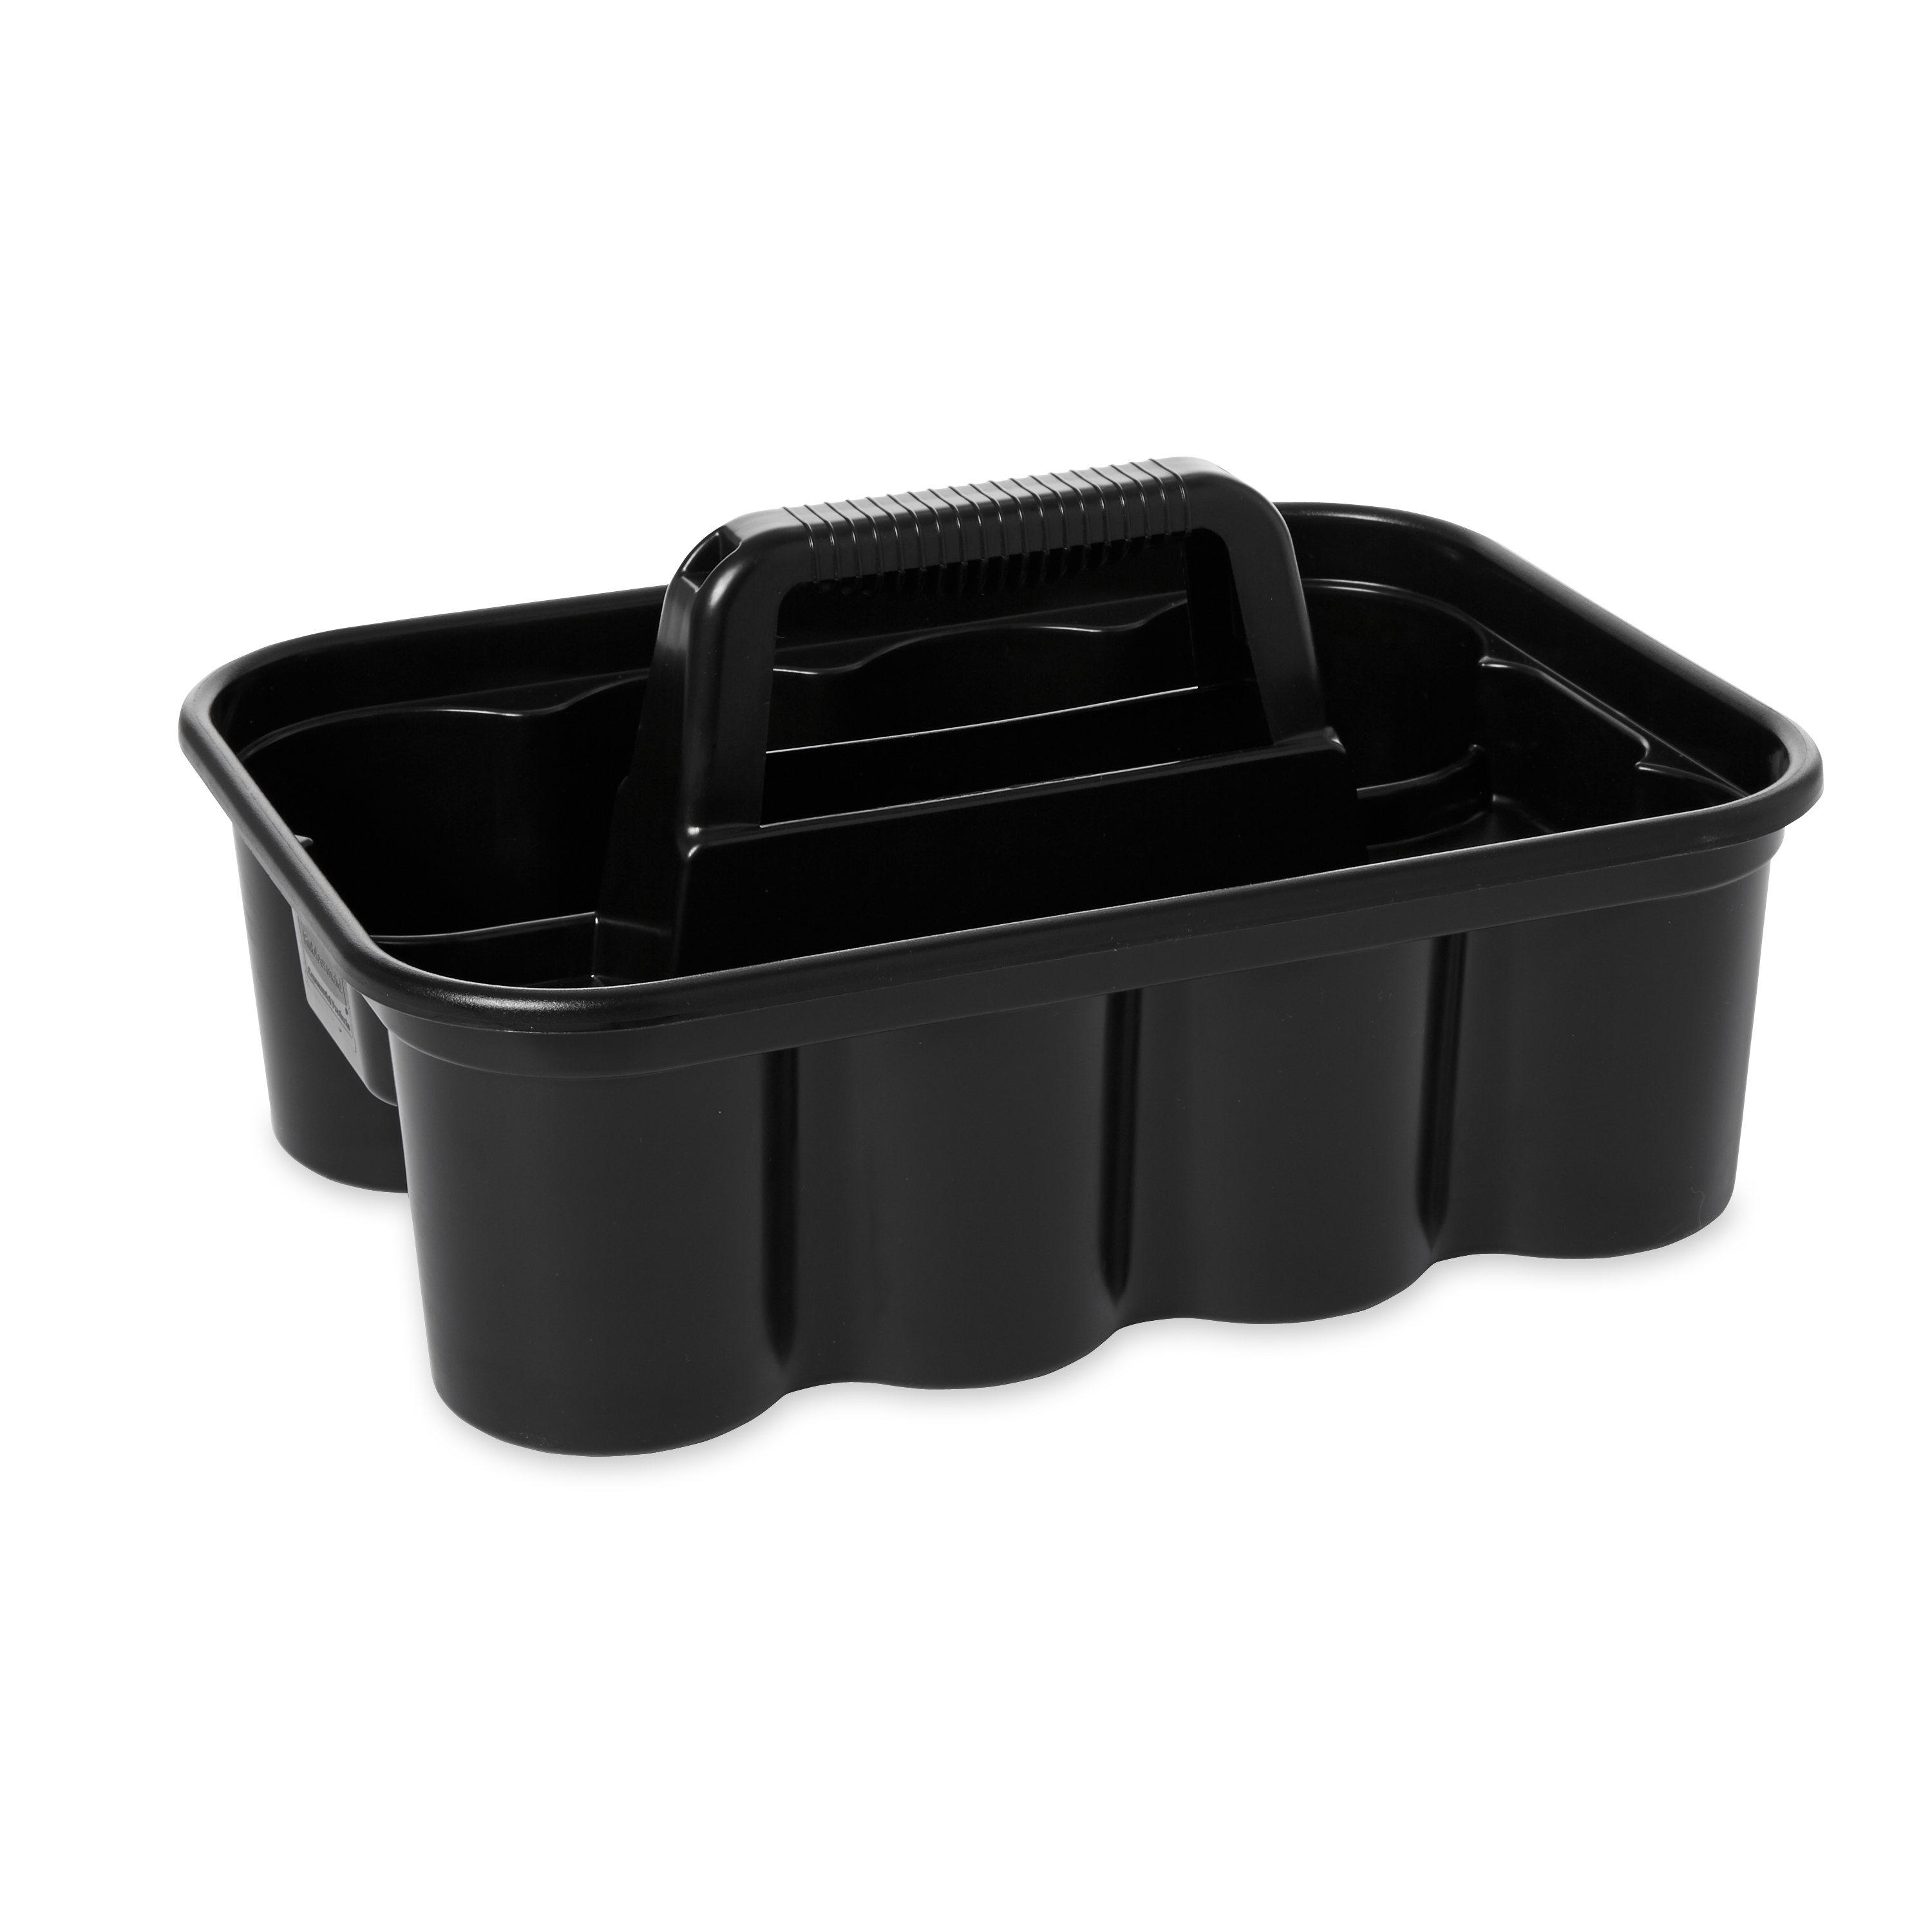 Black . Rubbermaid Commercial FG315488BLA Deluxe Carry Caddy 